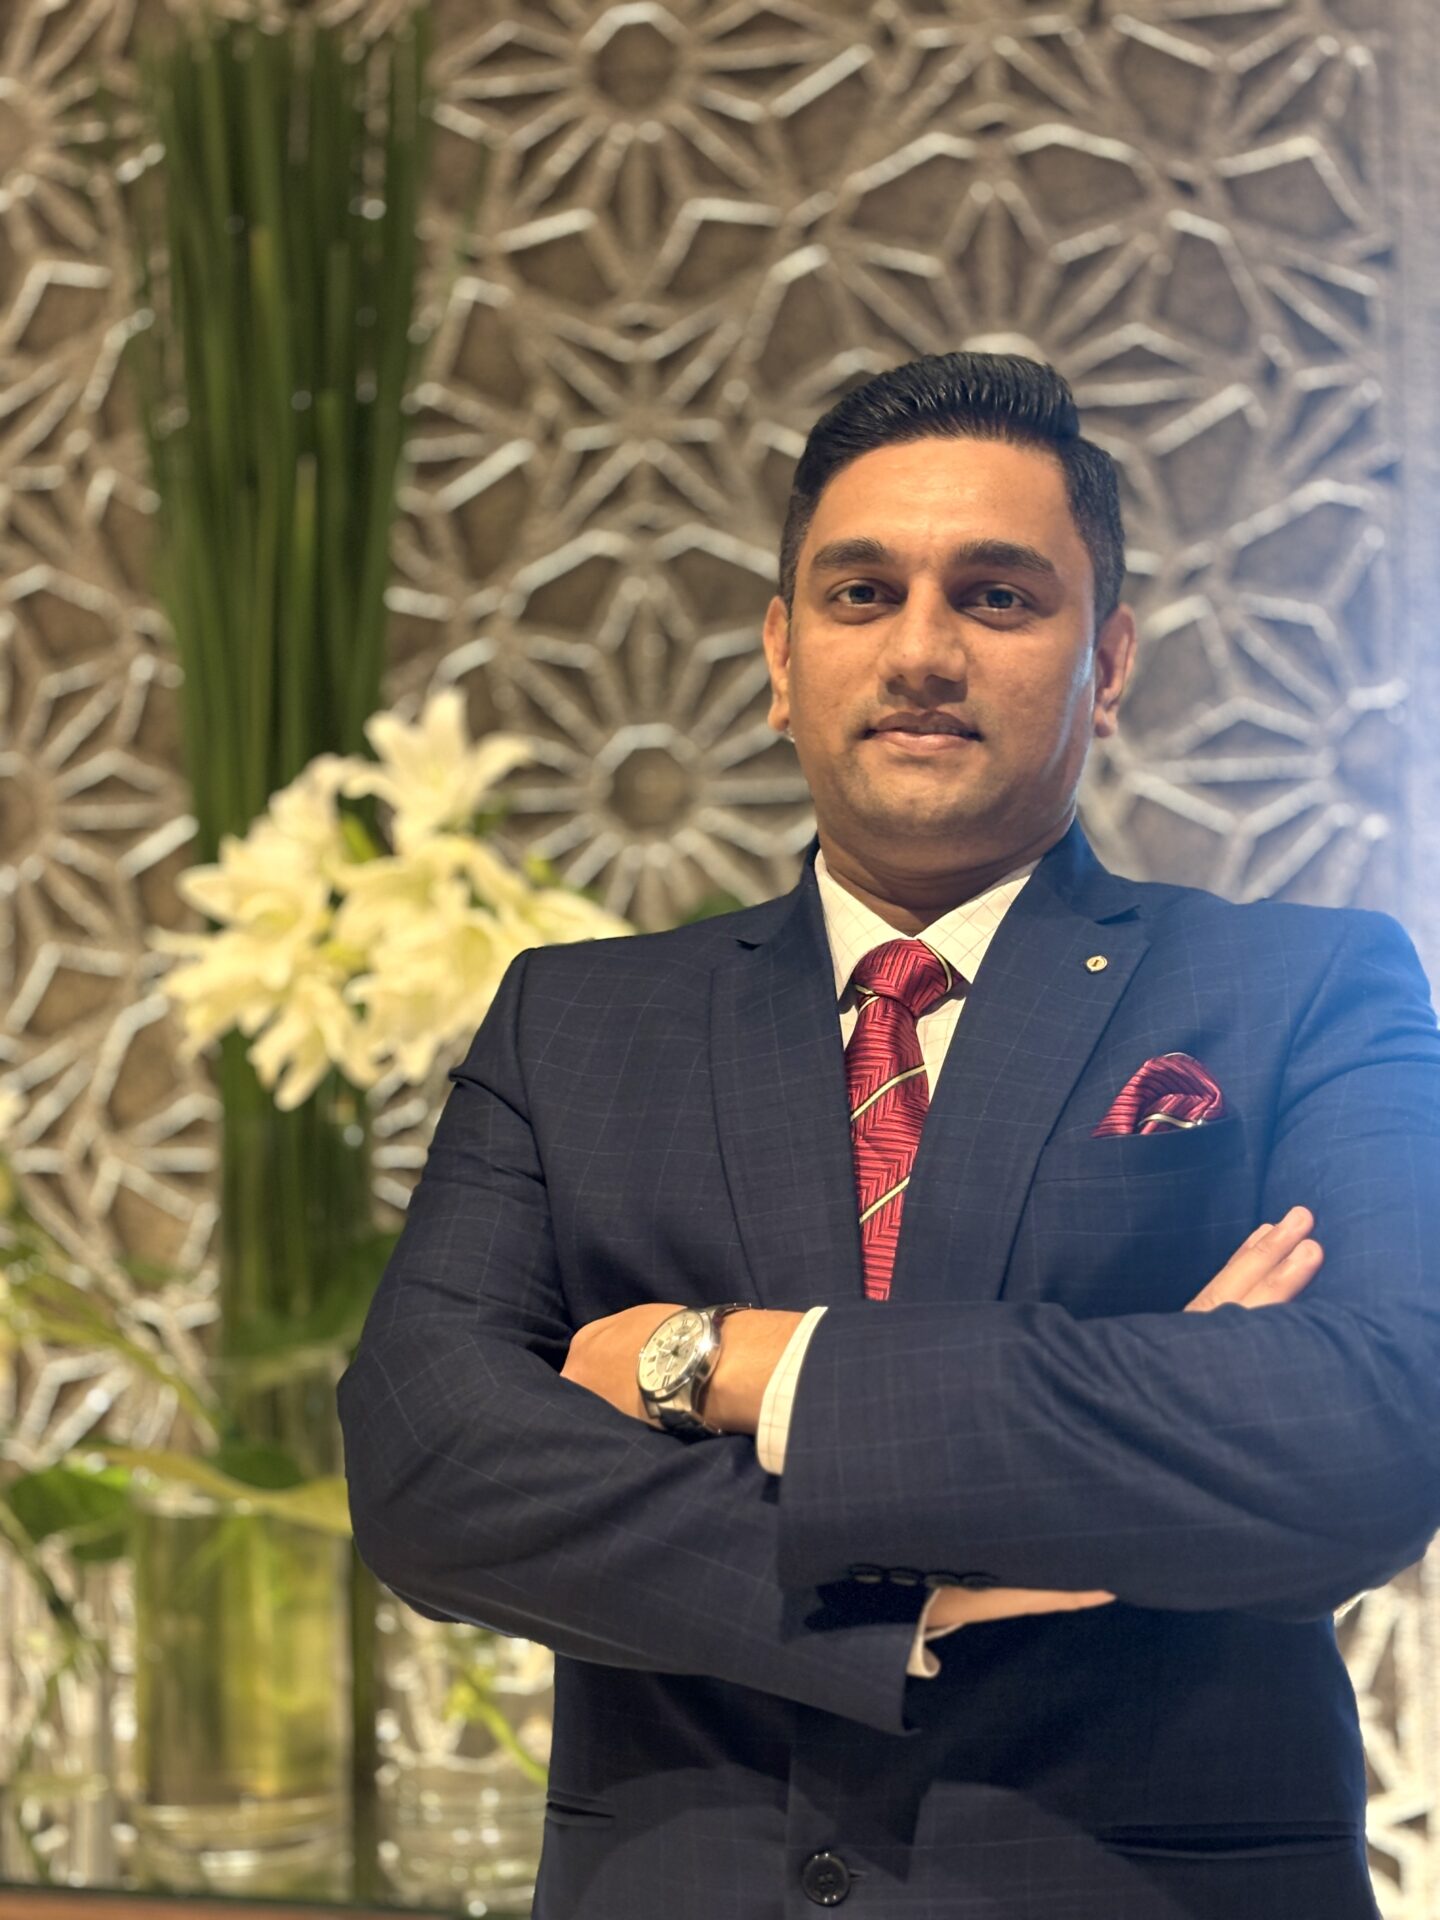 InterContinental Mumbai appoints Santosh Thorat as their Front Office Manager